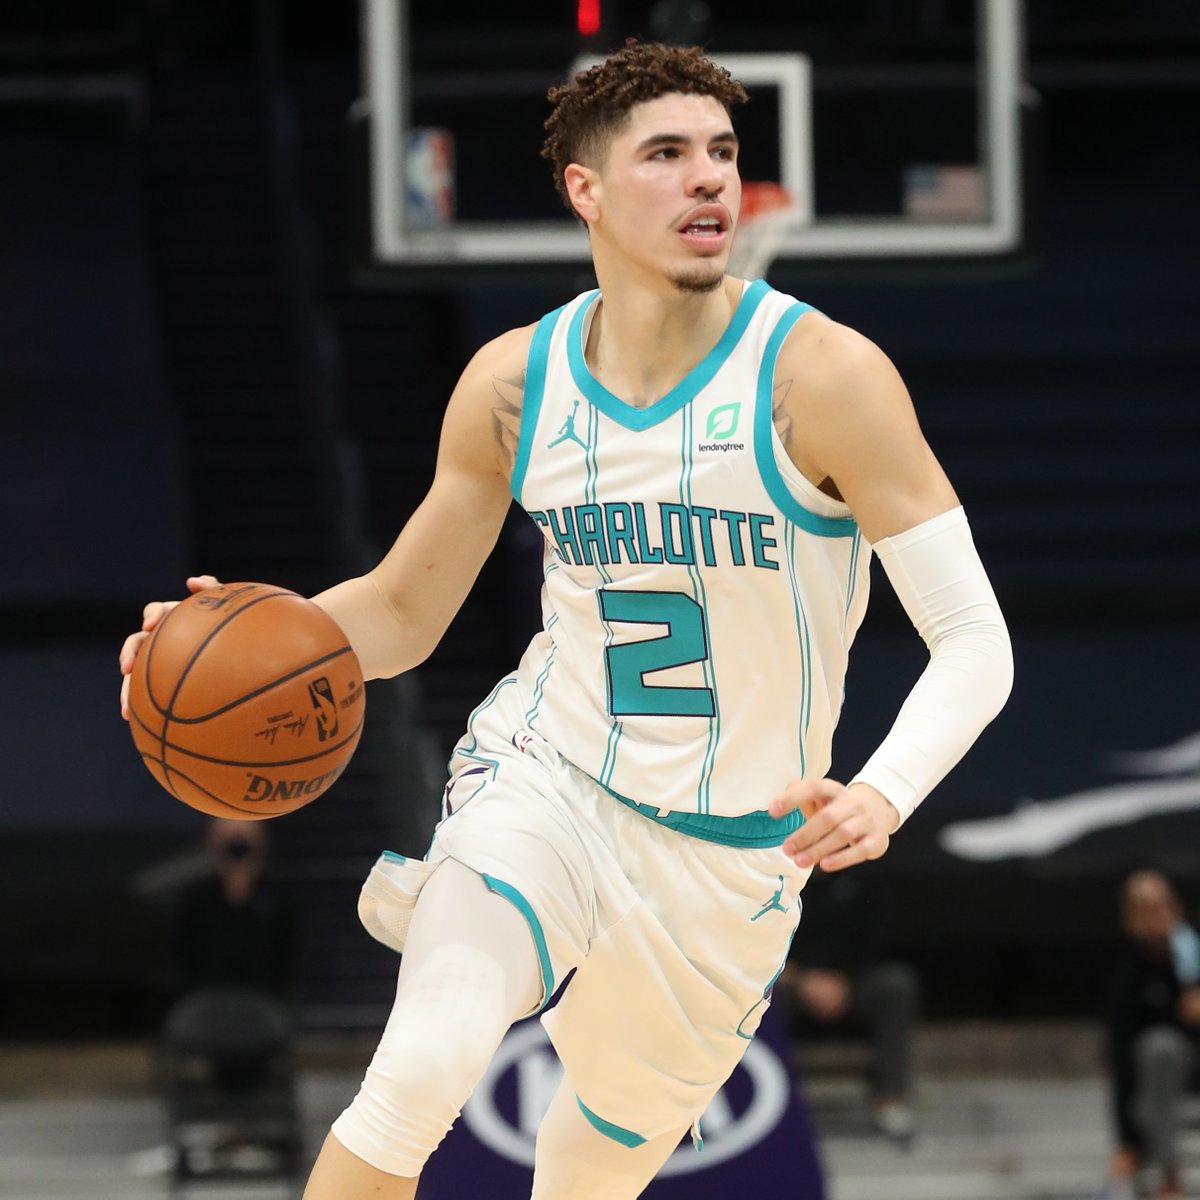 LaMelo Ball (14 REB, 7 AST tonight) has led the Hornets, outright or tied